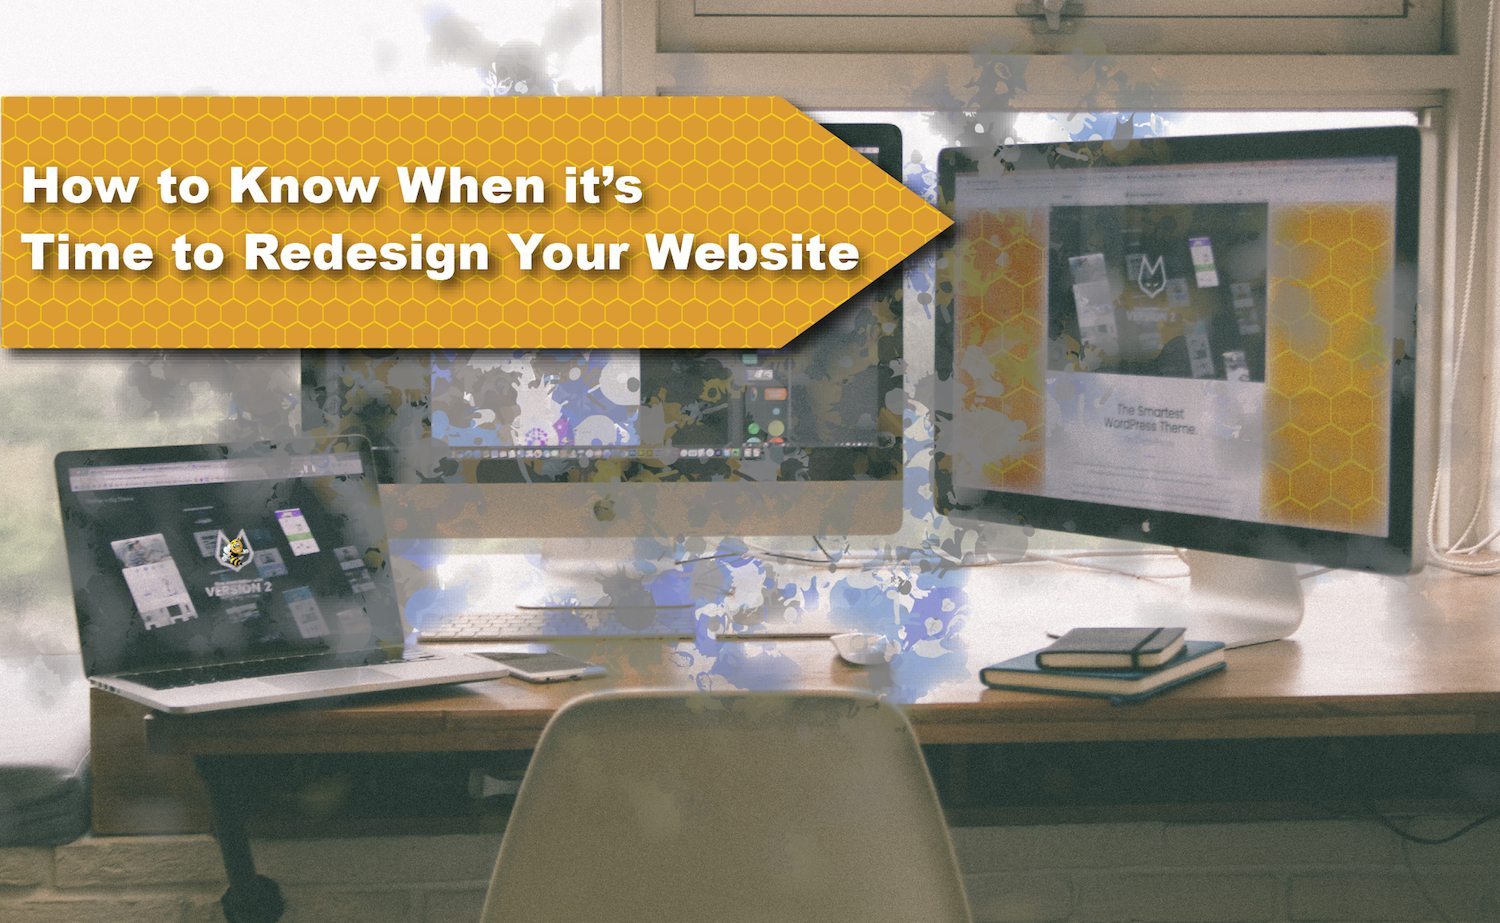 How to Know When It’s Time to Redesign Your Website